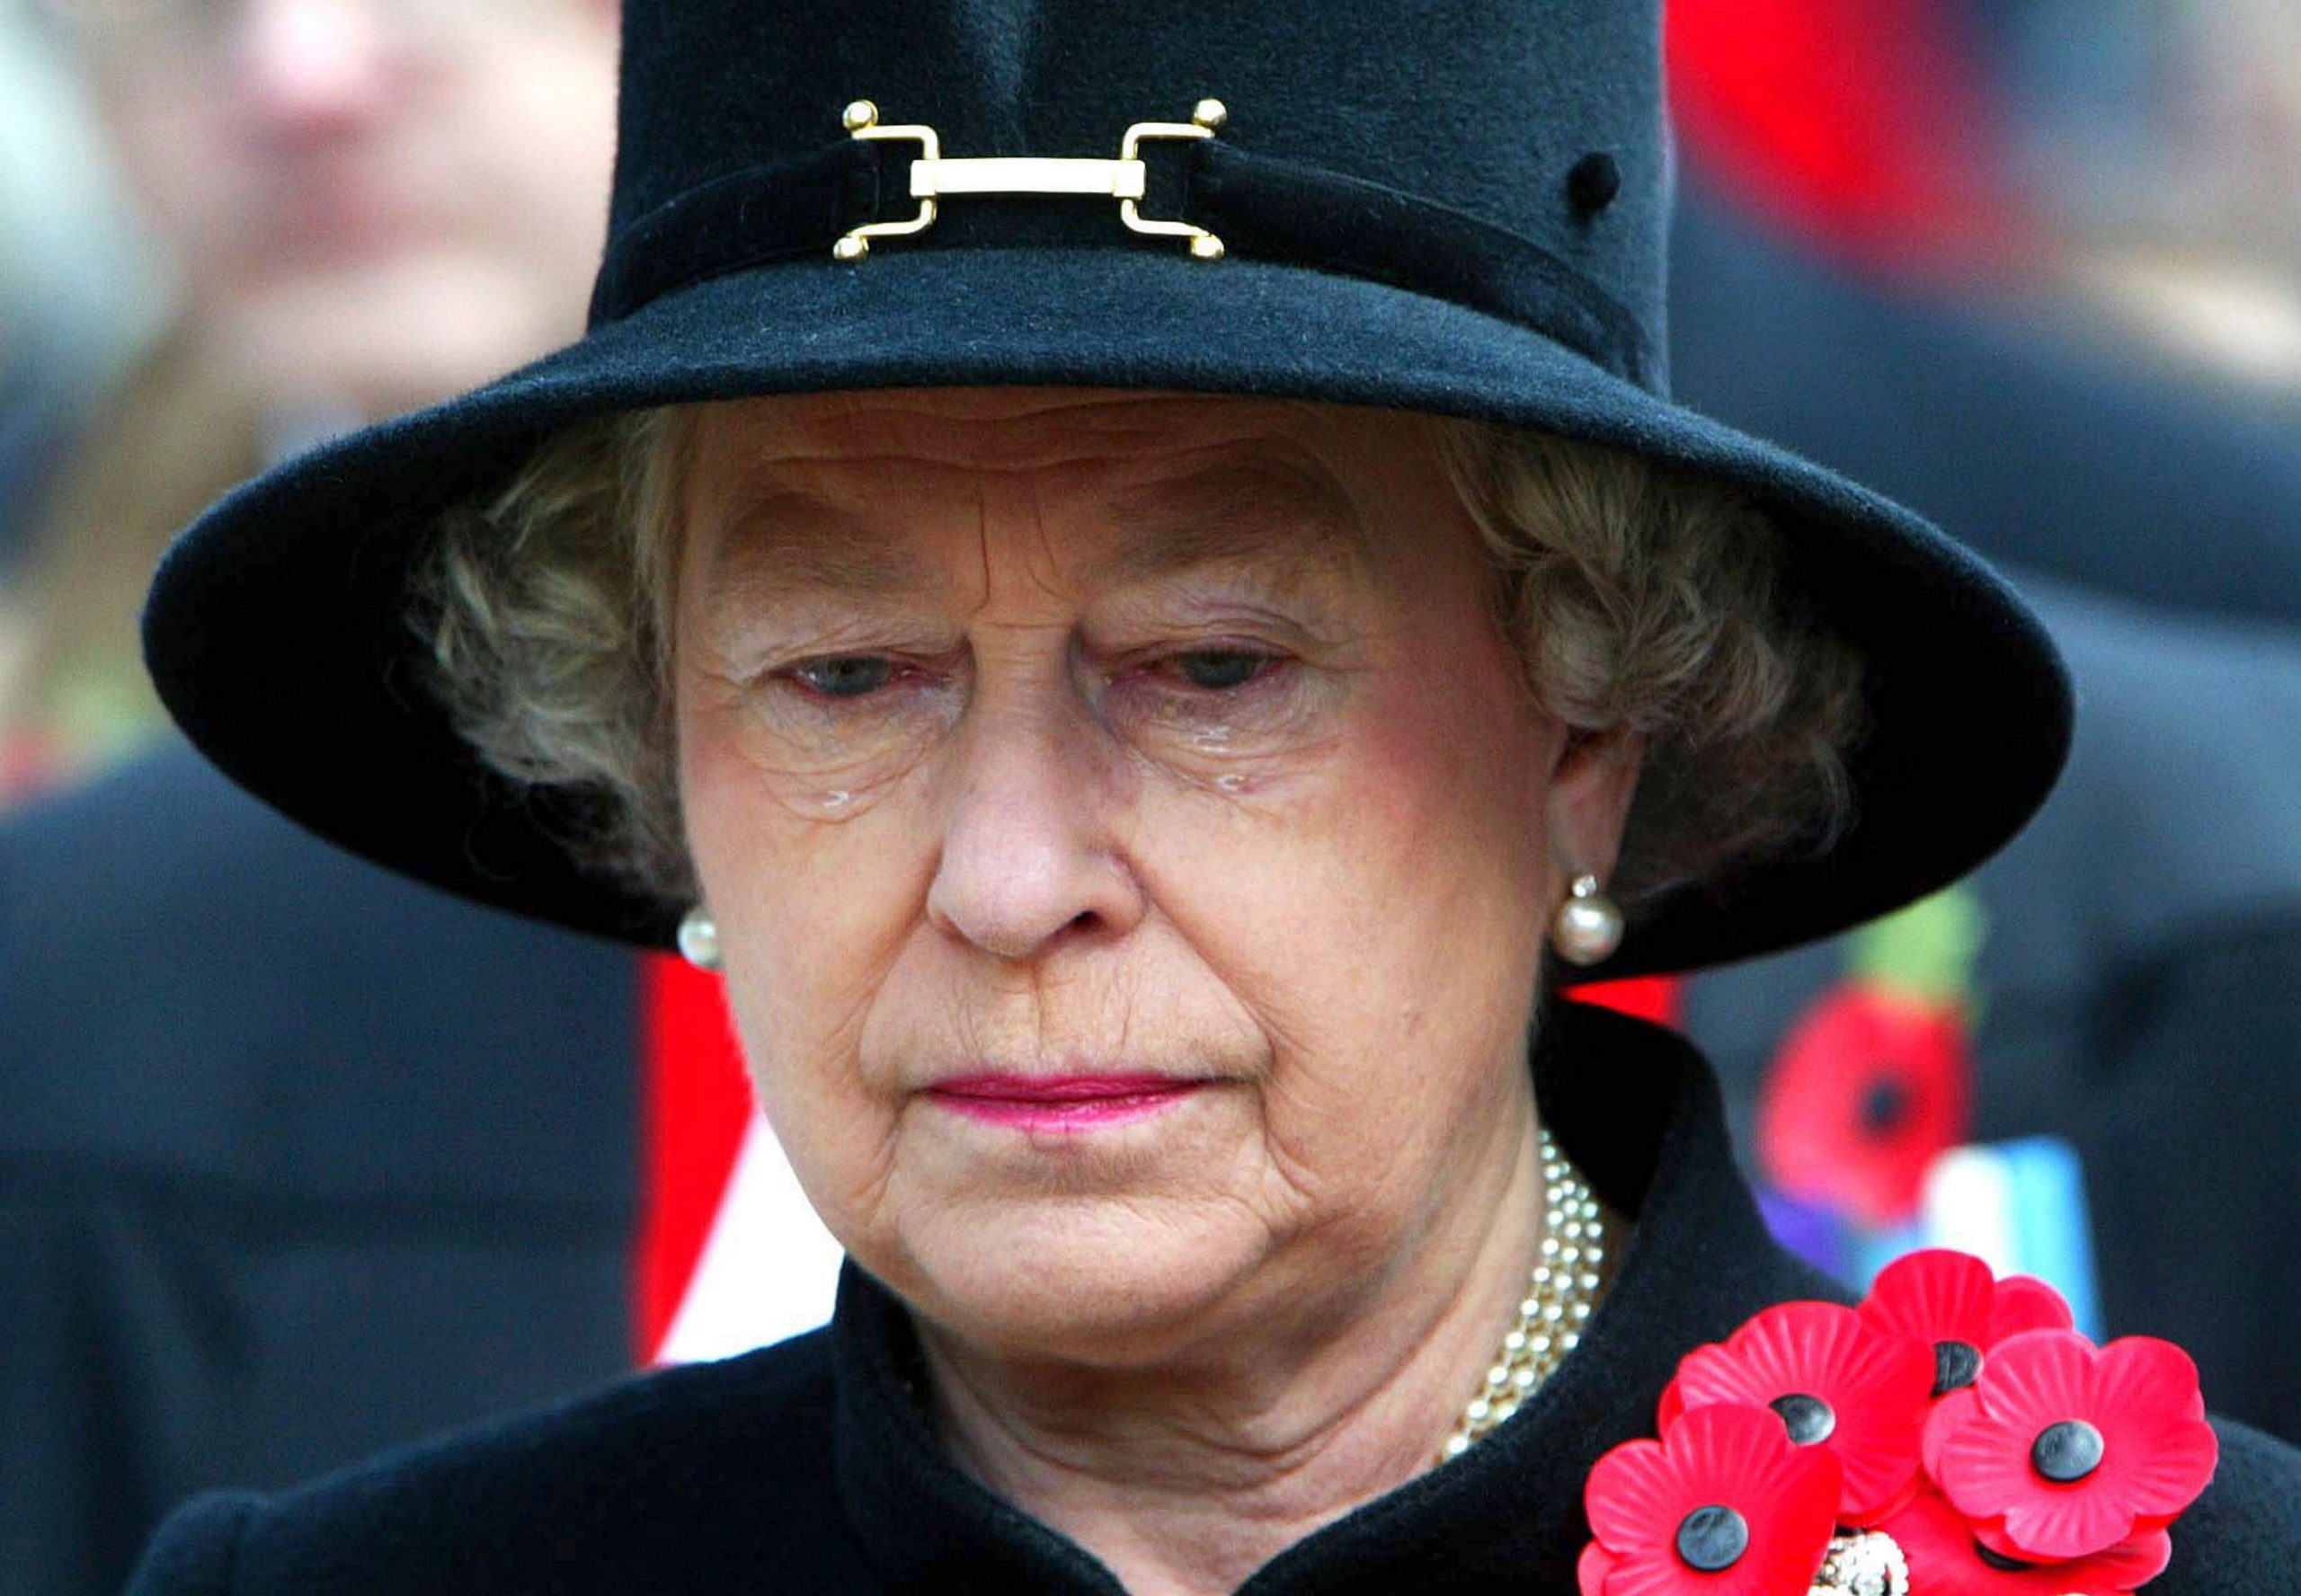 Queen Elizabeth II dead: Know about monarch’s age, net worth and titles